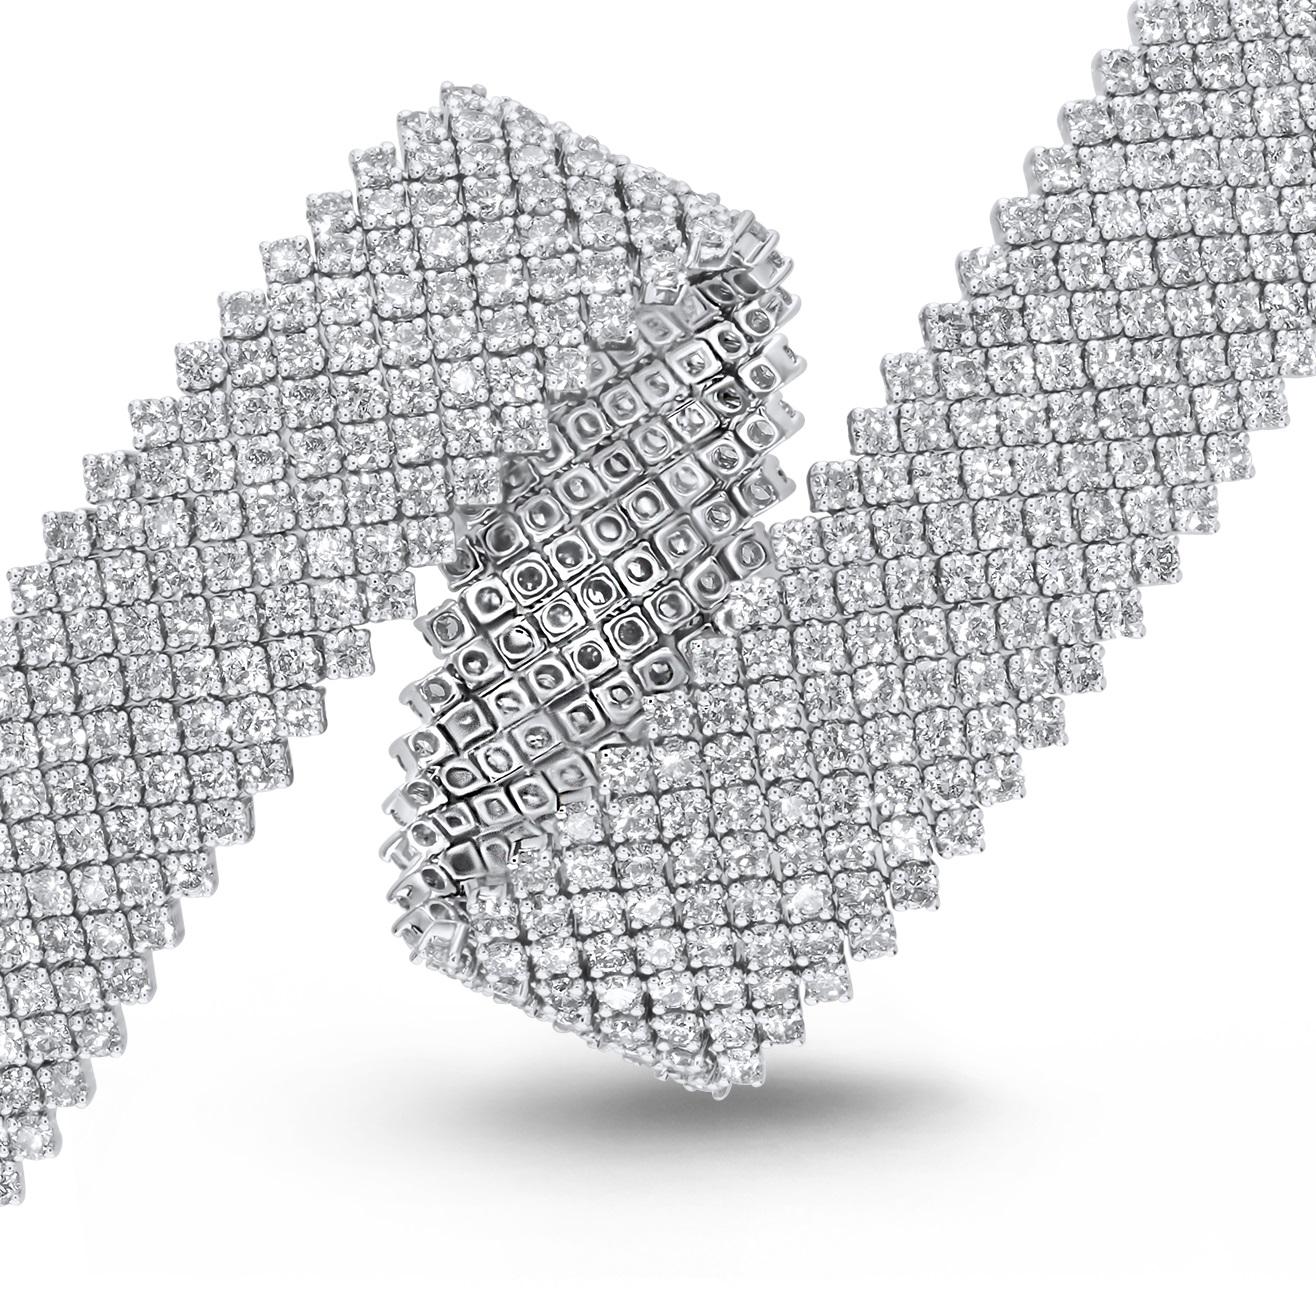 Exemplifying a timeless embodiment of elegance, this tennis bracelet showcases an impressive 17.61 carats of round natural diamonds, meticulously arranged in a densely woven strap pattern. Crafted with precision, it is secured in 18k white gold and